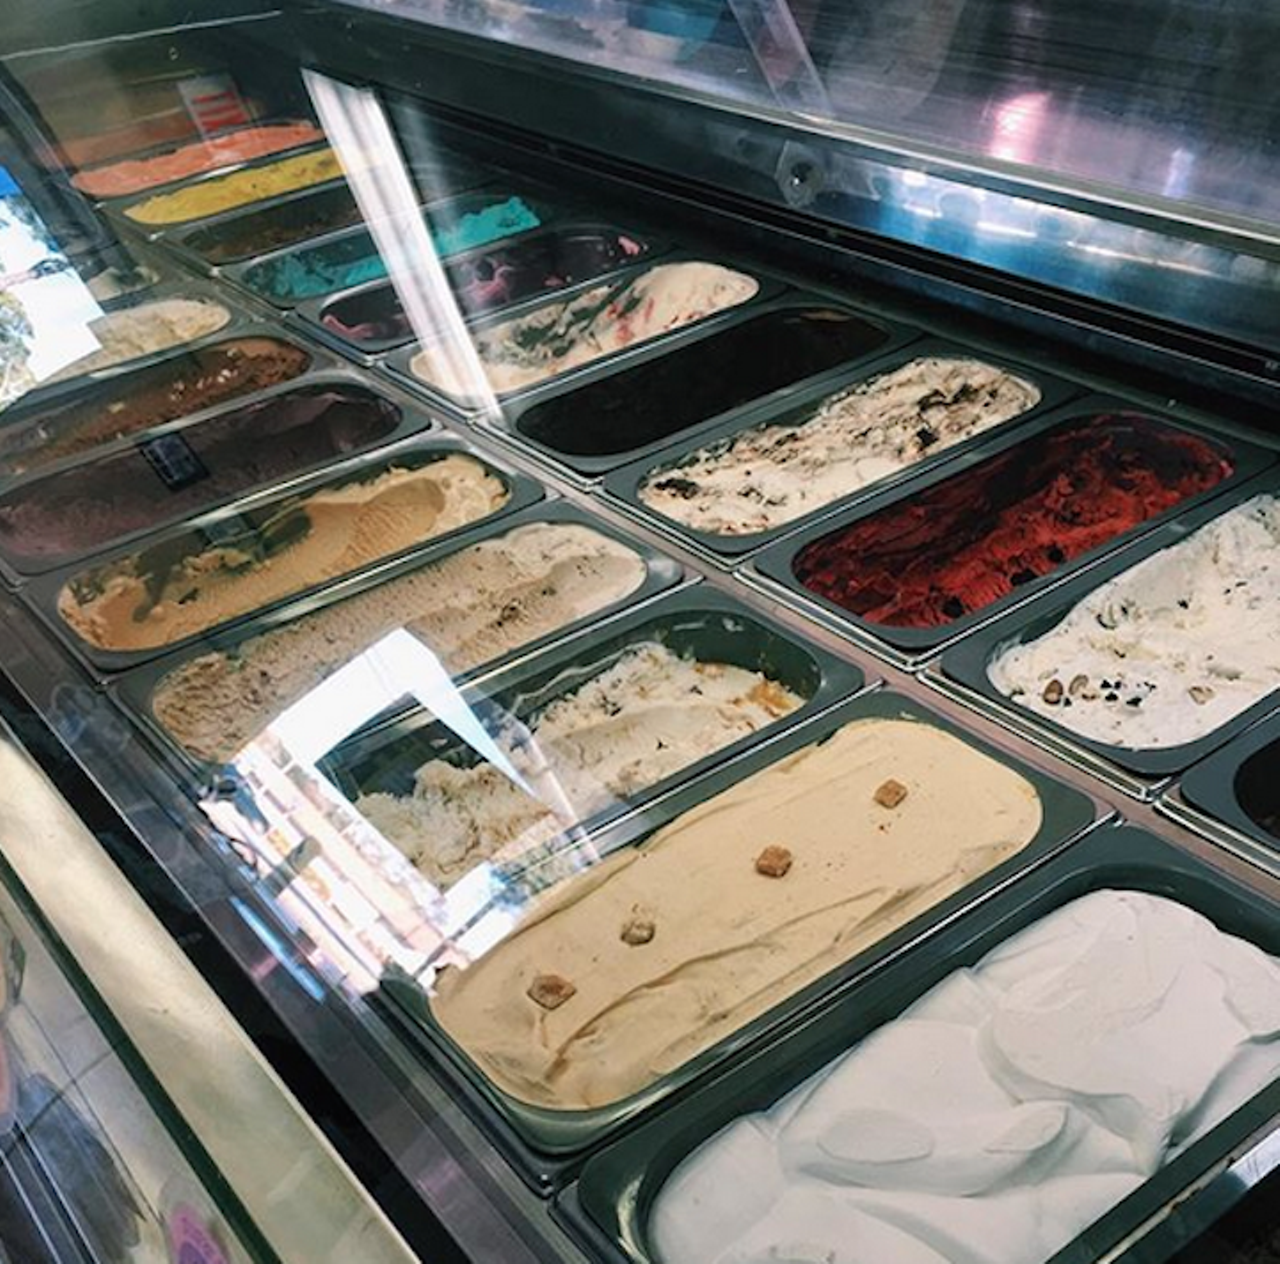 Frosty King Creamery
1020 S. Ridgewood Ave.; 386-423-9939
Frosty King&#146;s exterior might not catch your eye, but it&#146;s what&#146;s on the inside that counts. Ice cream made on-site, sugar-free options, a slew of flavors. You&#146;ve got nothing to lose.
Photo via factionless_freak/Instagram